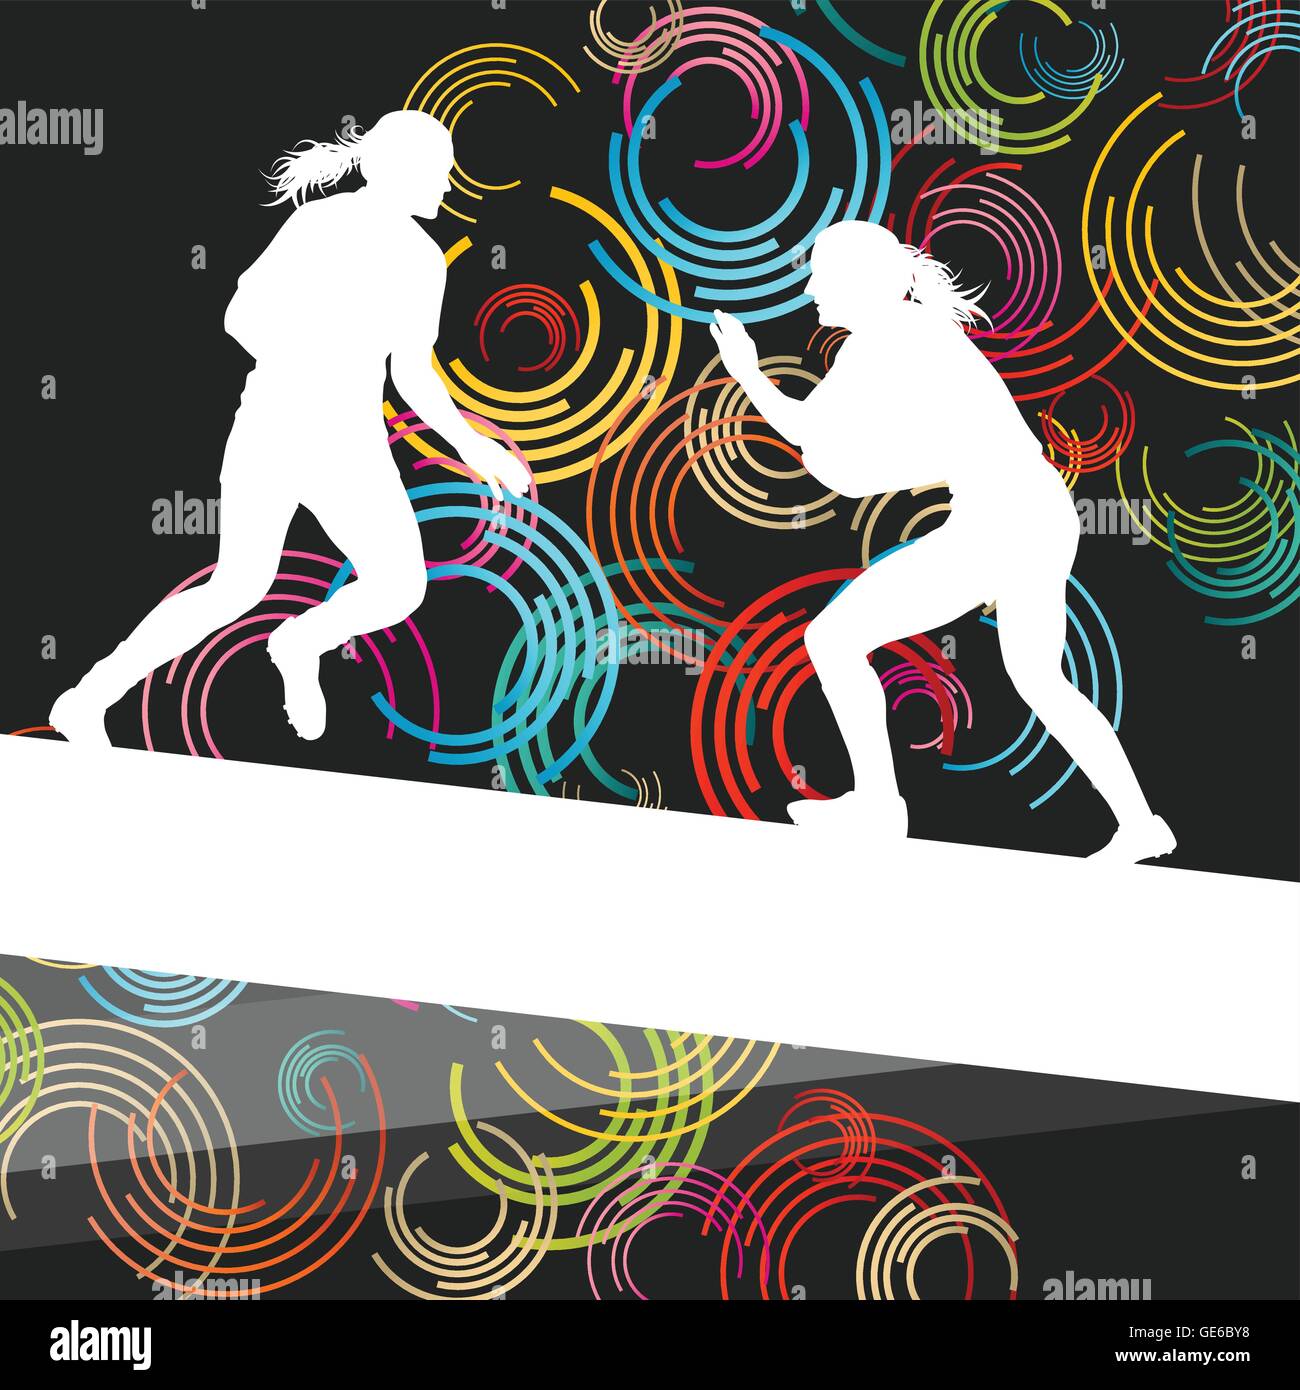 Rugby players young active women healthy sport silhouettes vector background illustration Stock Vector